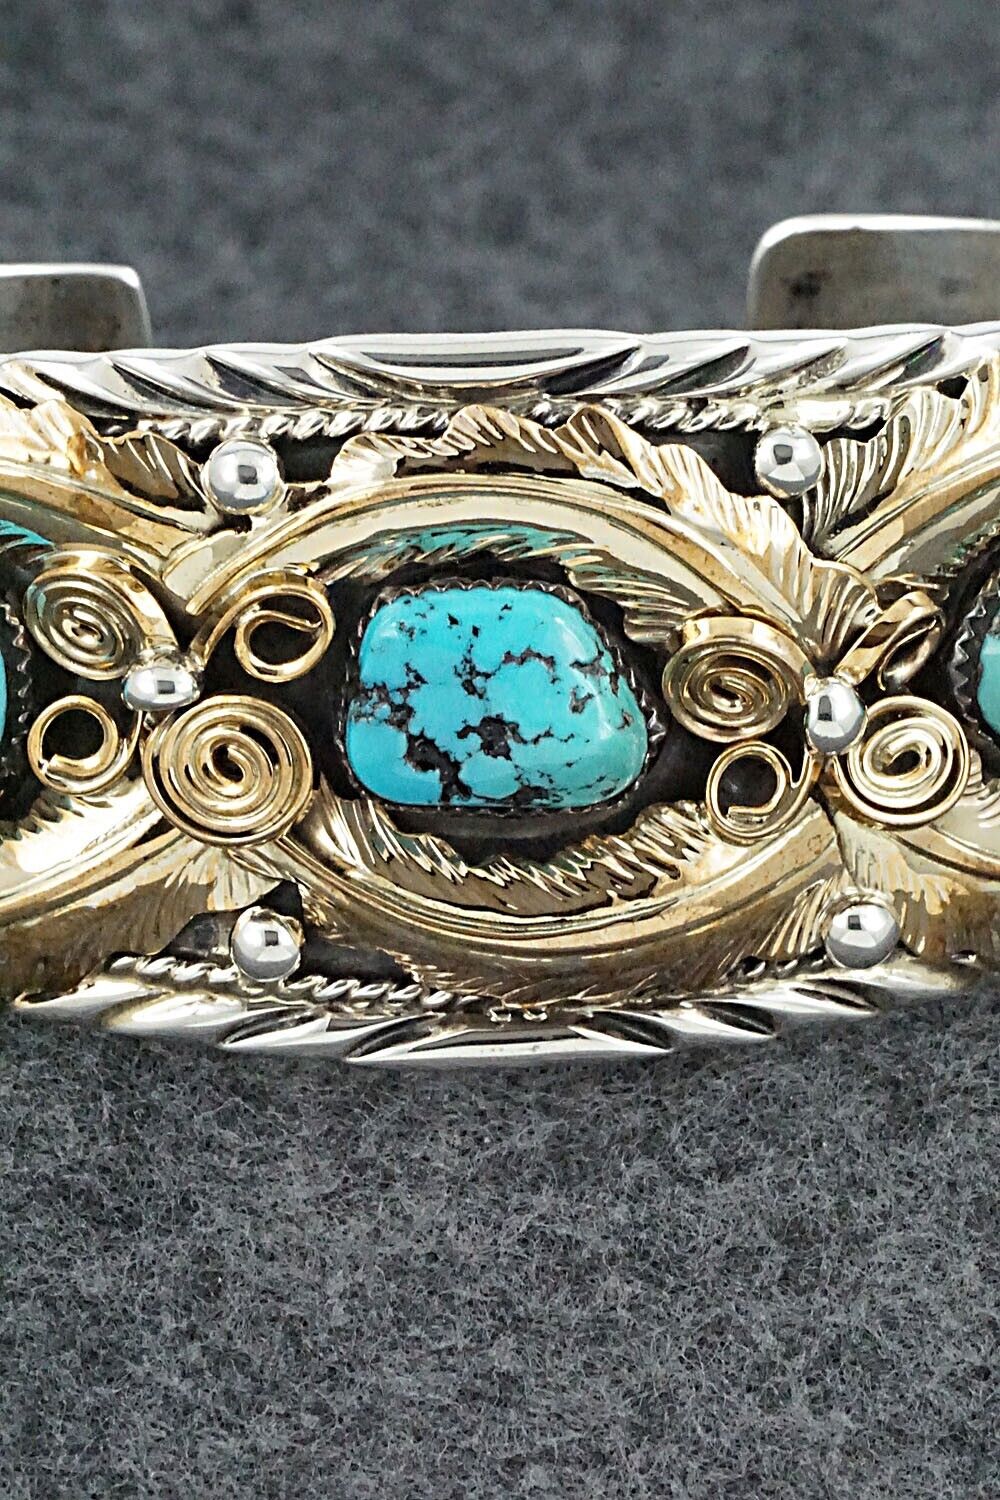 Turquoise, Coral & Sterling Silver Bracelet - Allen Chee